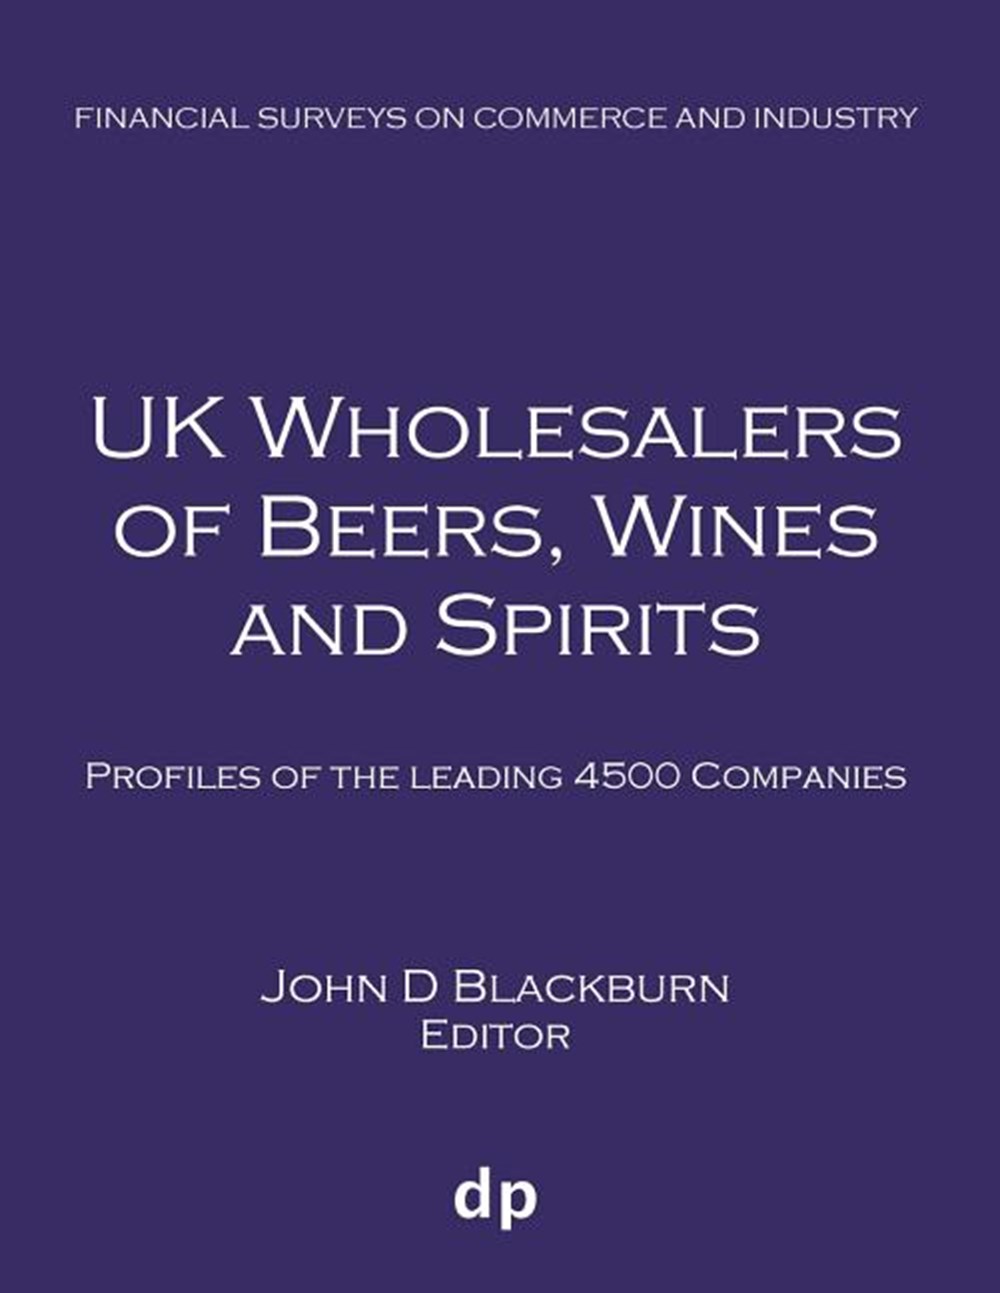 UK Wholesalers of Beers, Wines and Spirits: Profiles of the leading 4500 companies (Spring 2019)